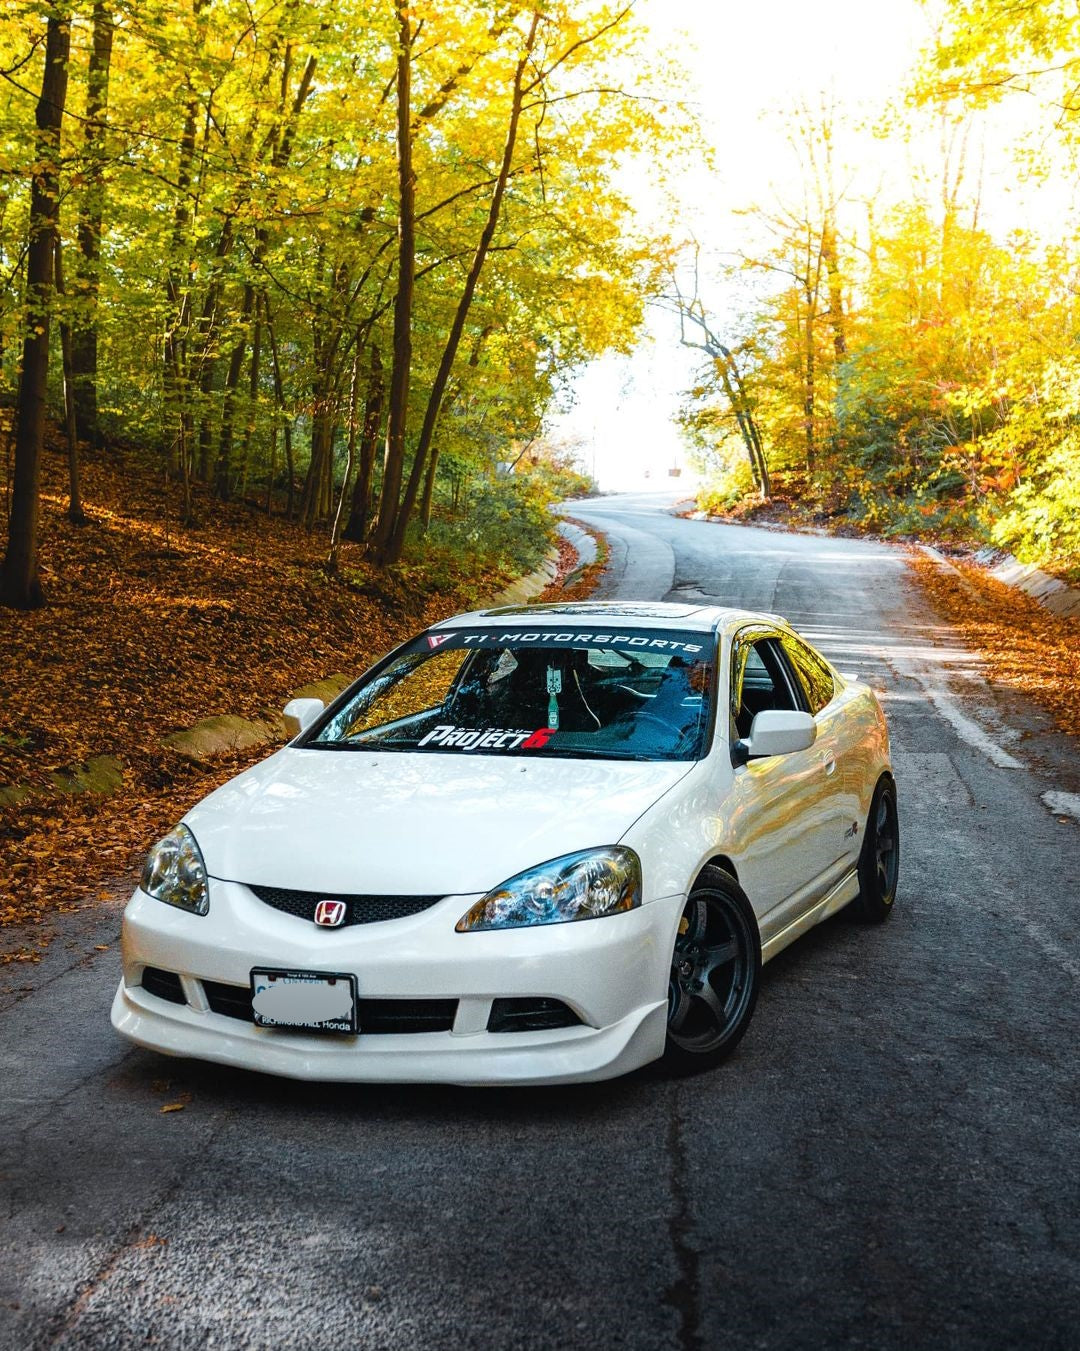 Acura Lip Kits for the RSX, Integra, and more. We offer a variety of lip kits whether you have an DC5, Integra, etc.